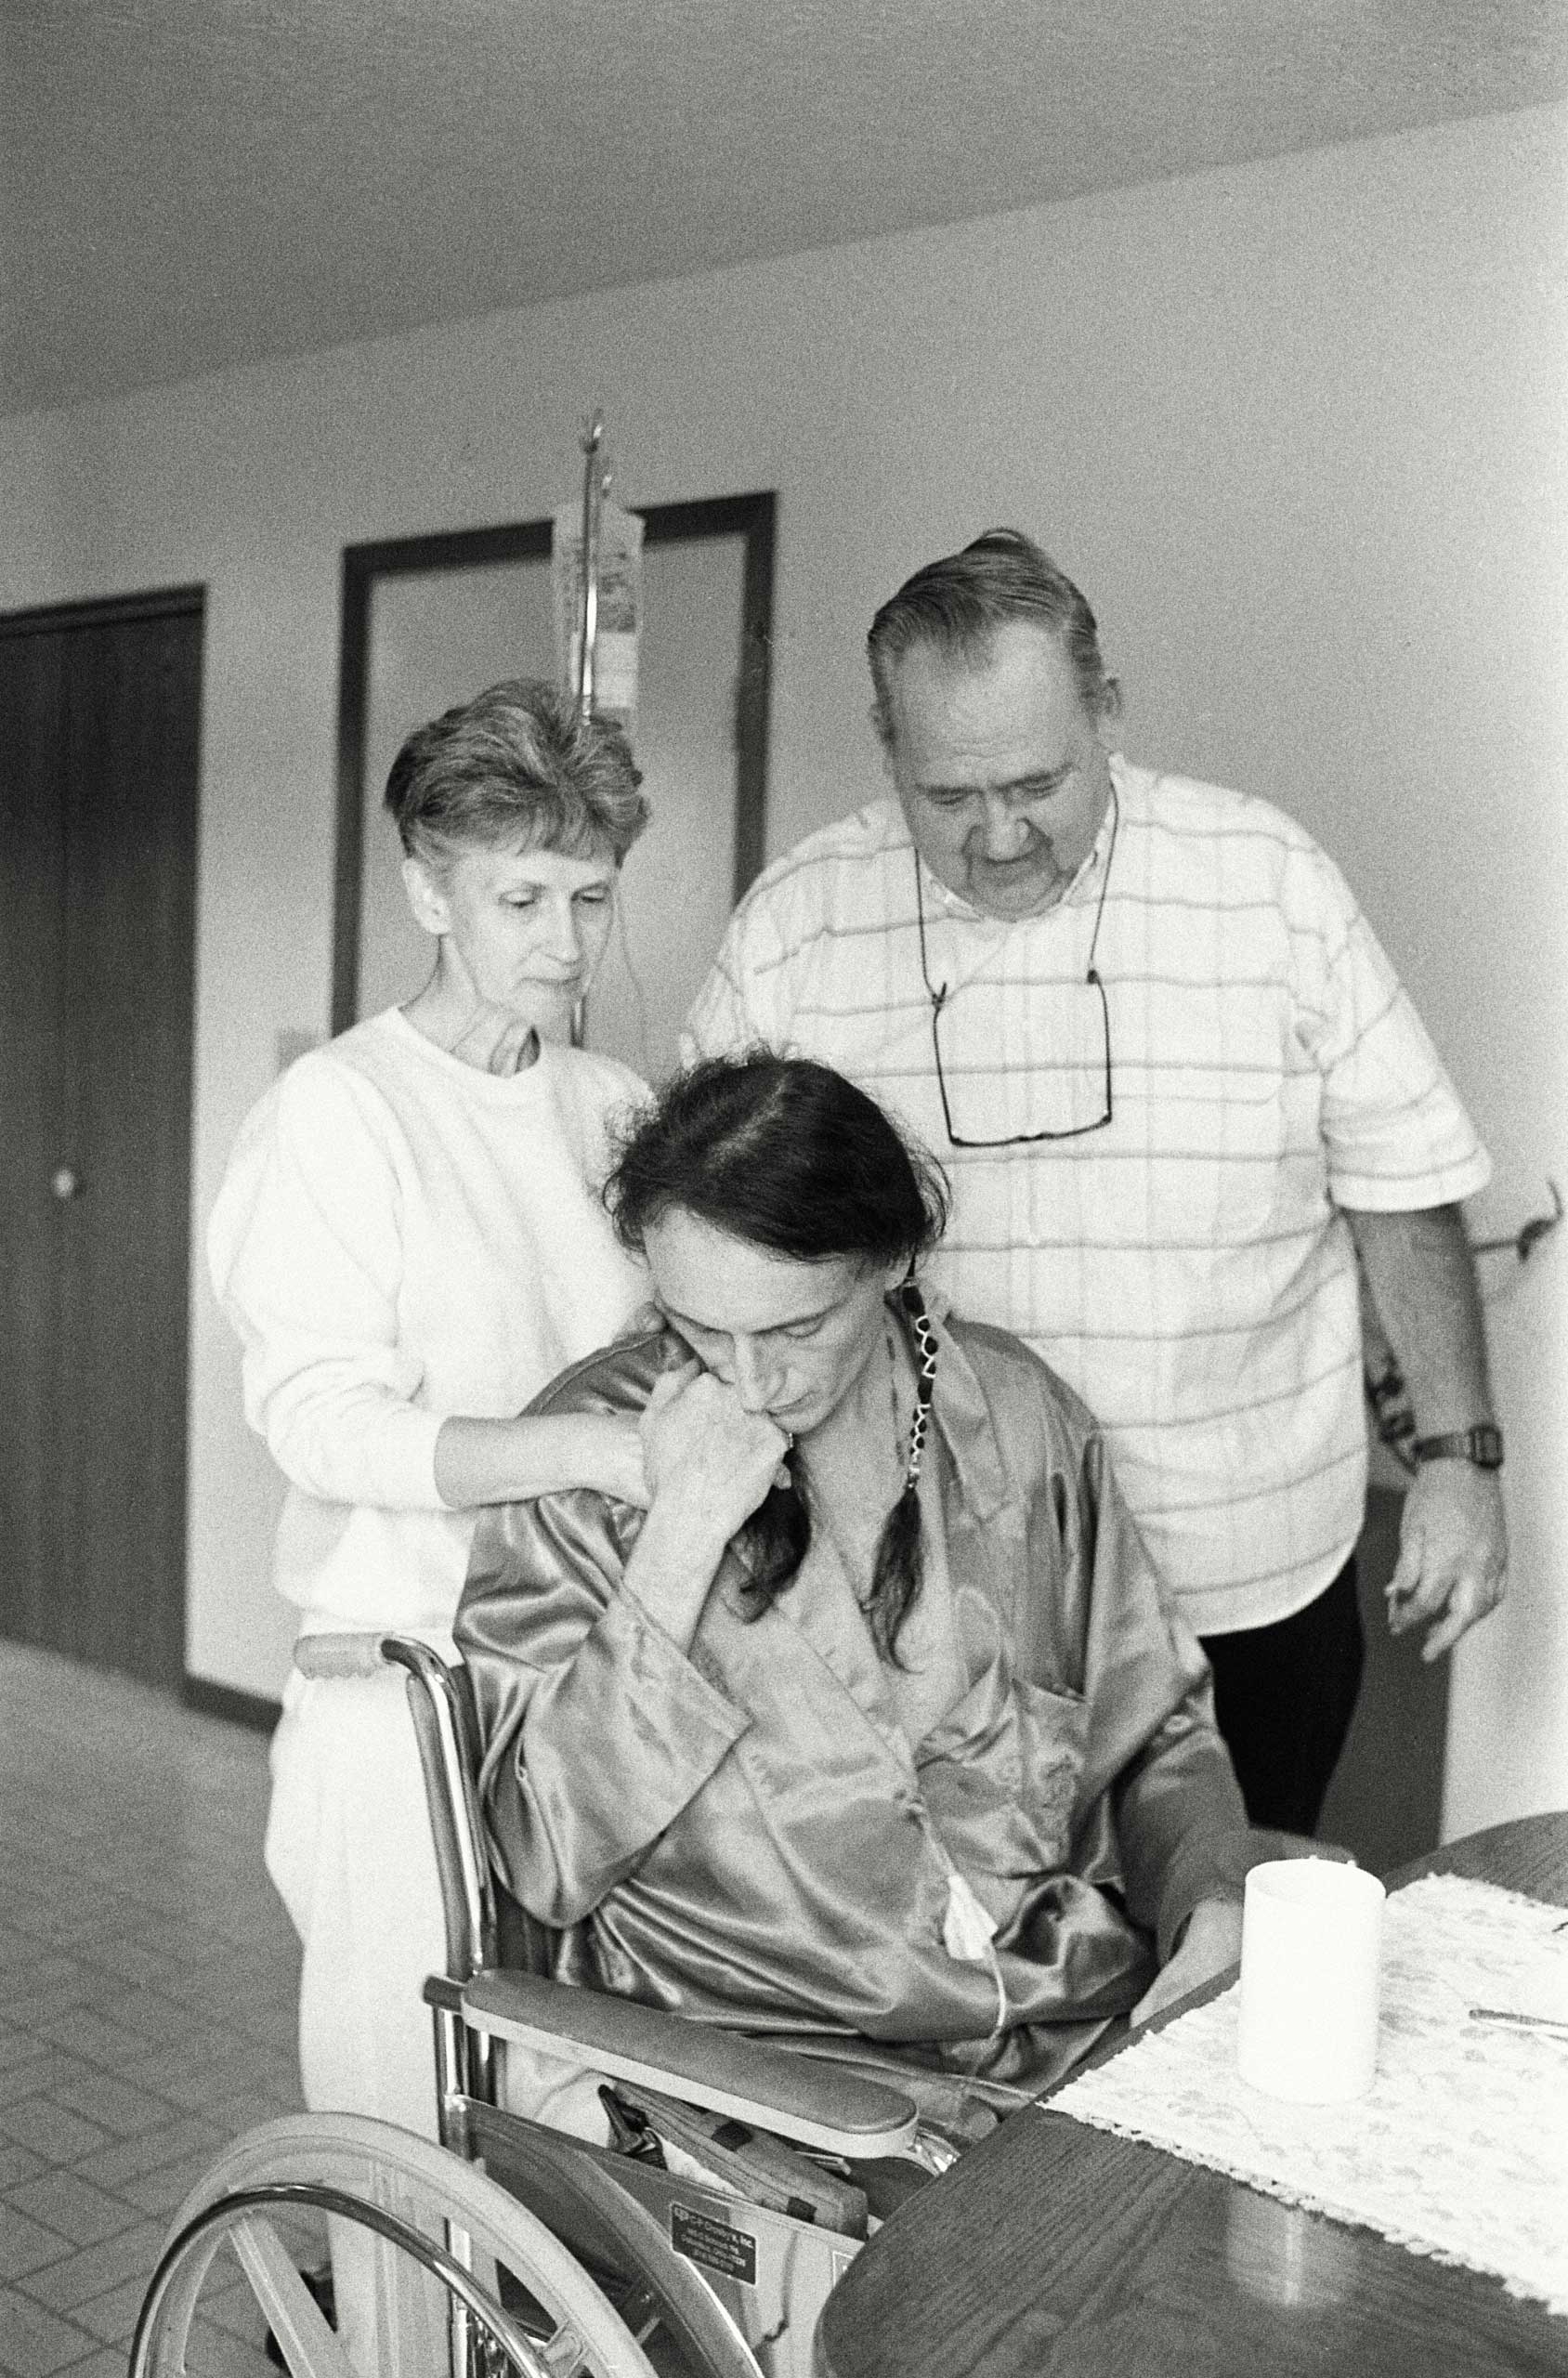 Peta with Bill and Kay Kirby at Pater Noster House, 1992. "I made up my mind," Kay Kirby said, "when David was dying and Peta was helping to care for him, that when Peta's time came -- and we all knew it would come -- that we would care for him. There was never any question. We were going to take care of Peta. That was that."